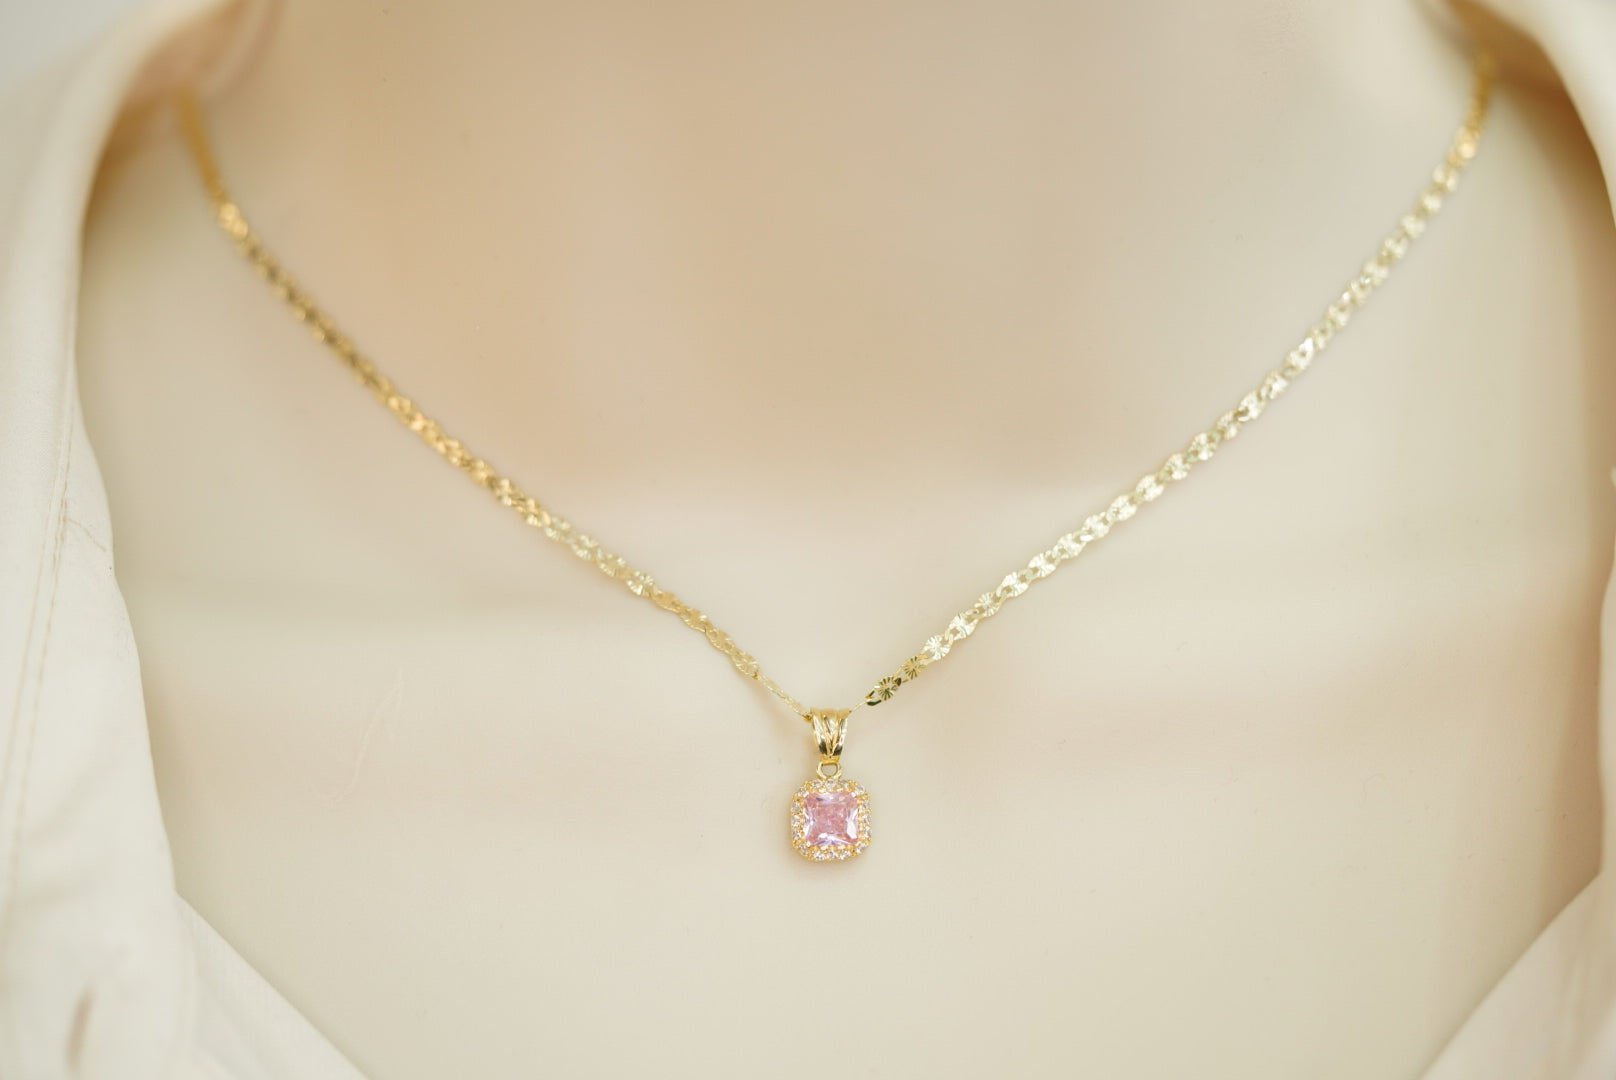 14k Set or Single Square Light Pink Earring, Chain and Pendant